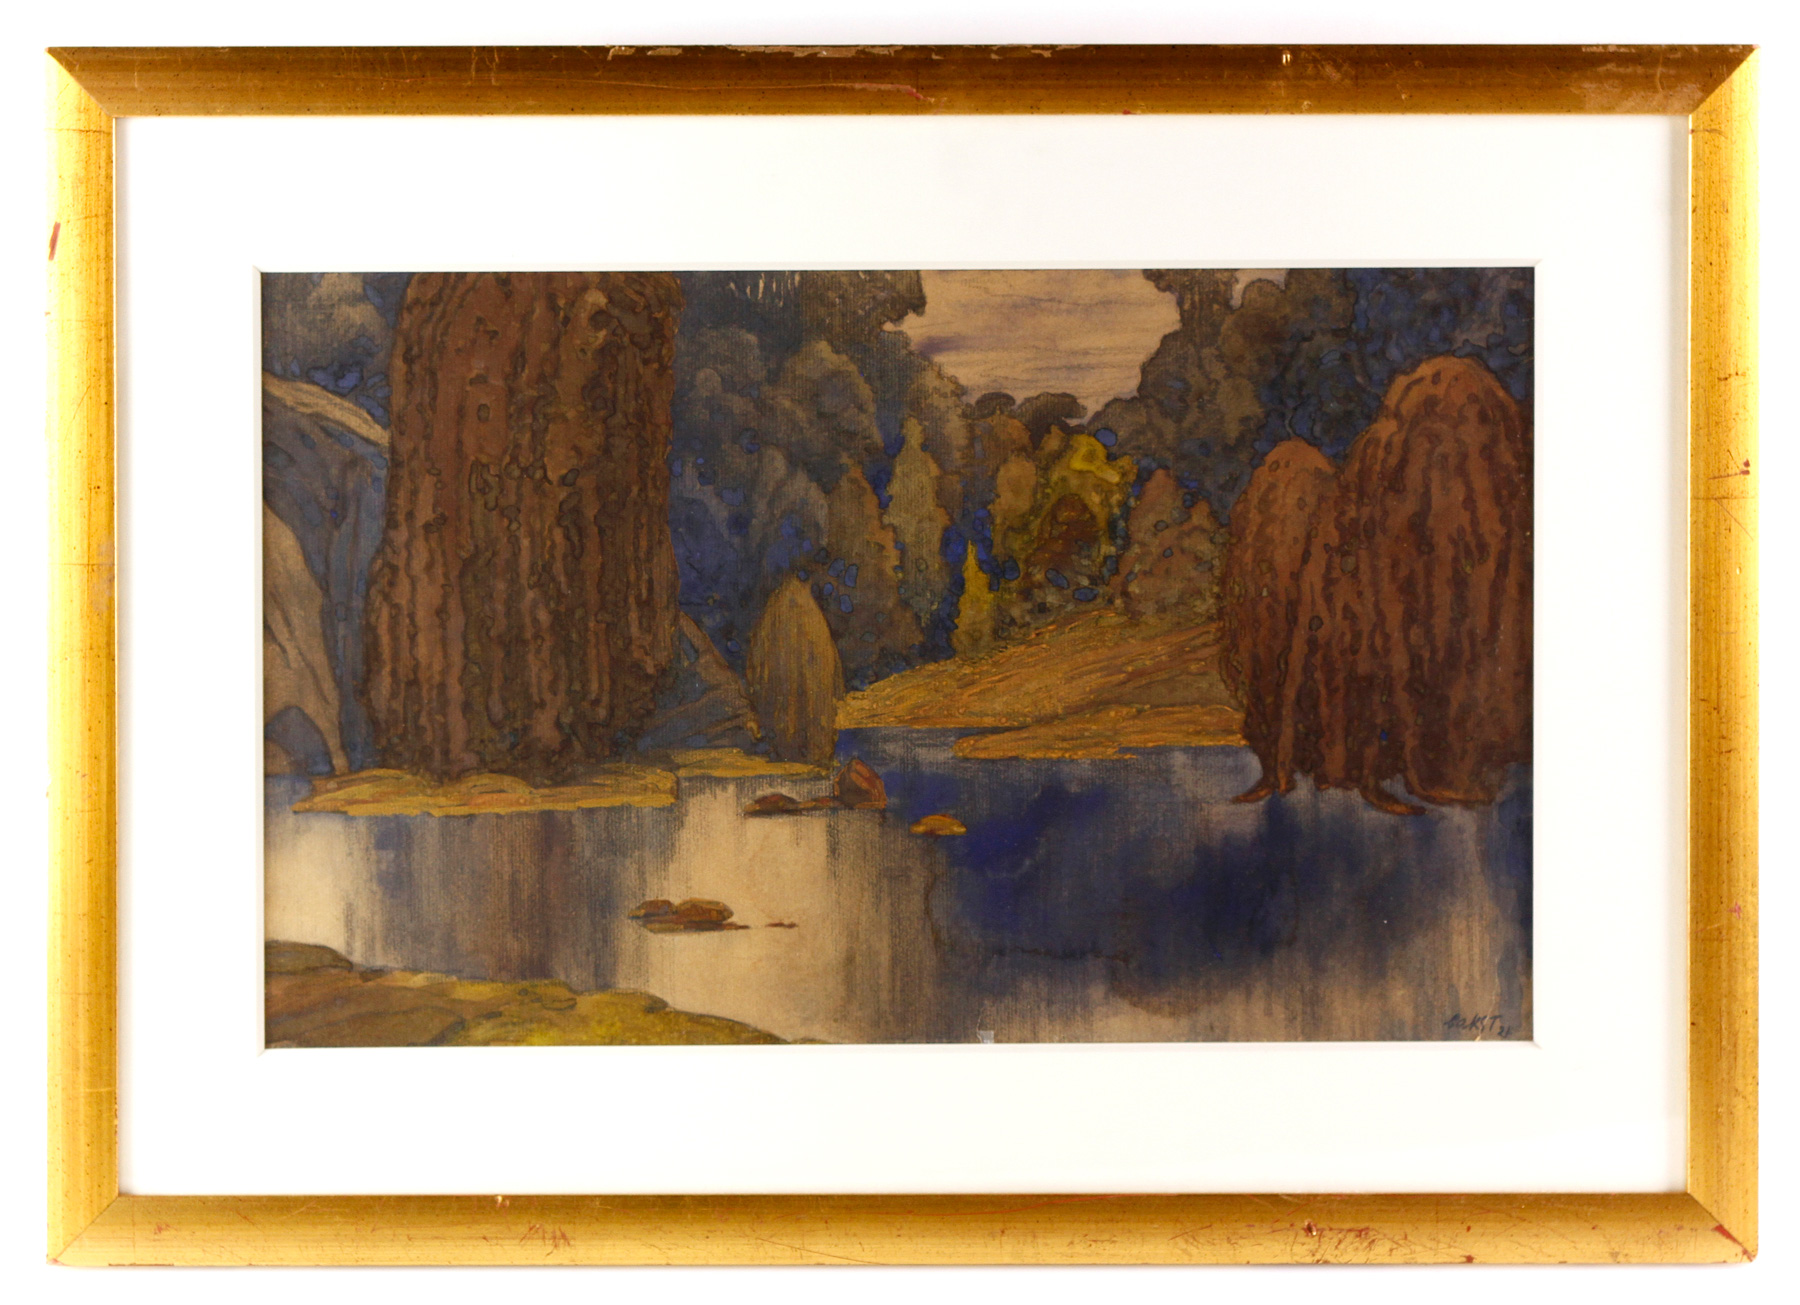 Leon Bakst (1866-1924), landscape with reflective pool, watercolor and pastel on paper, signed, dated 1921